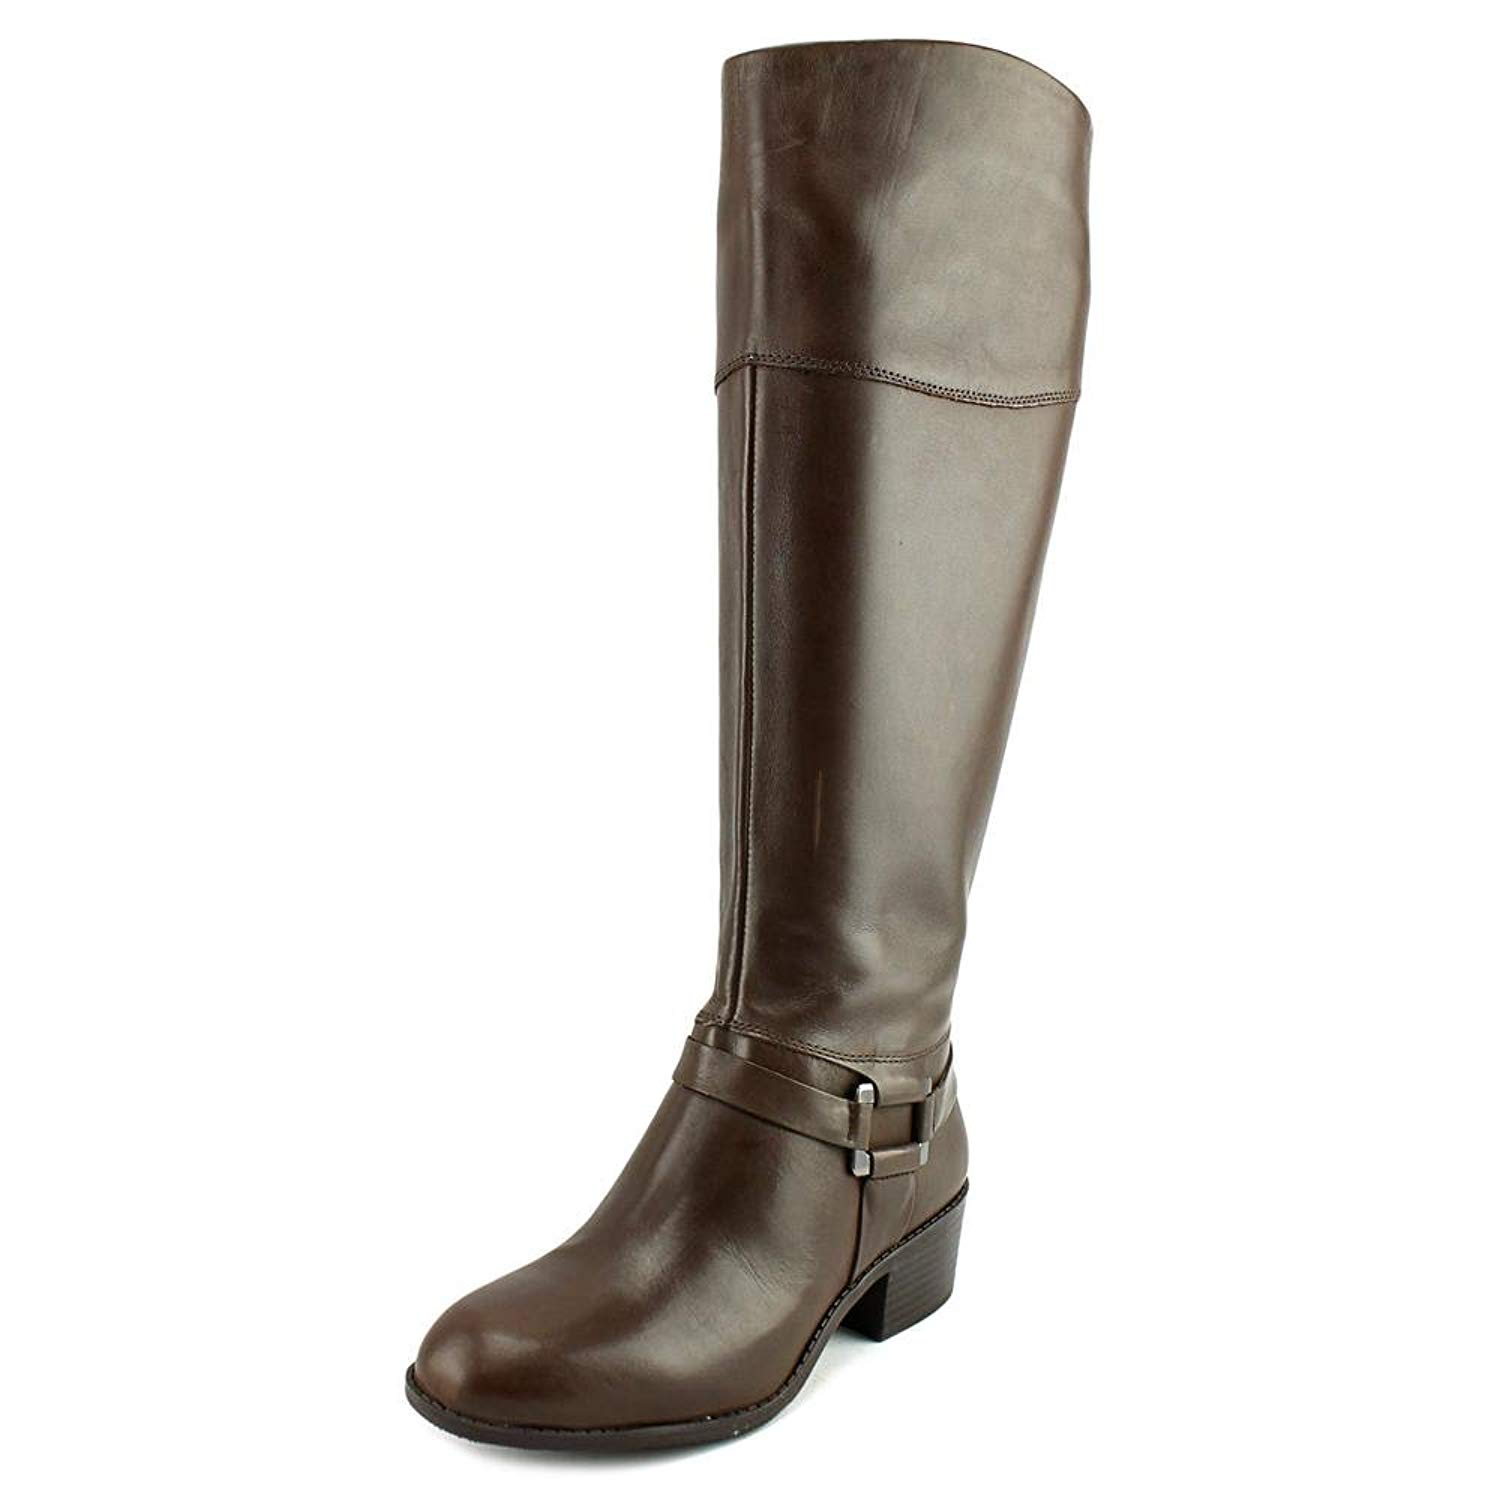 Alfani Womens Boots in Brown Color, Size 9 DNB | eBay